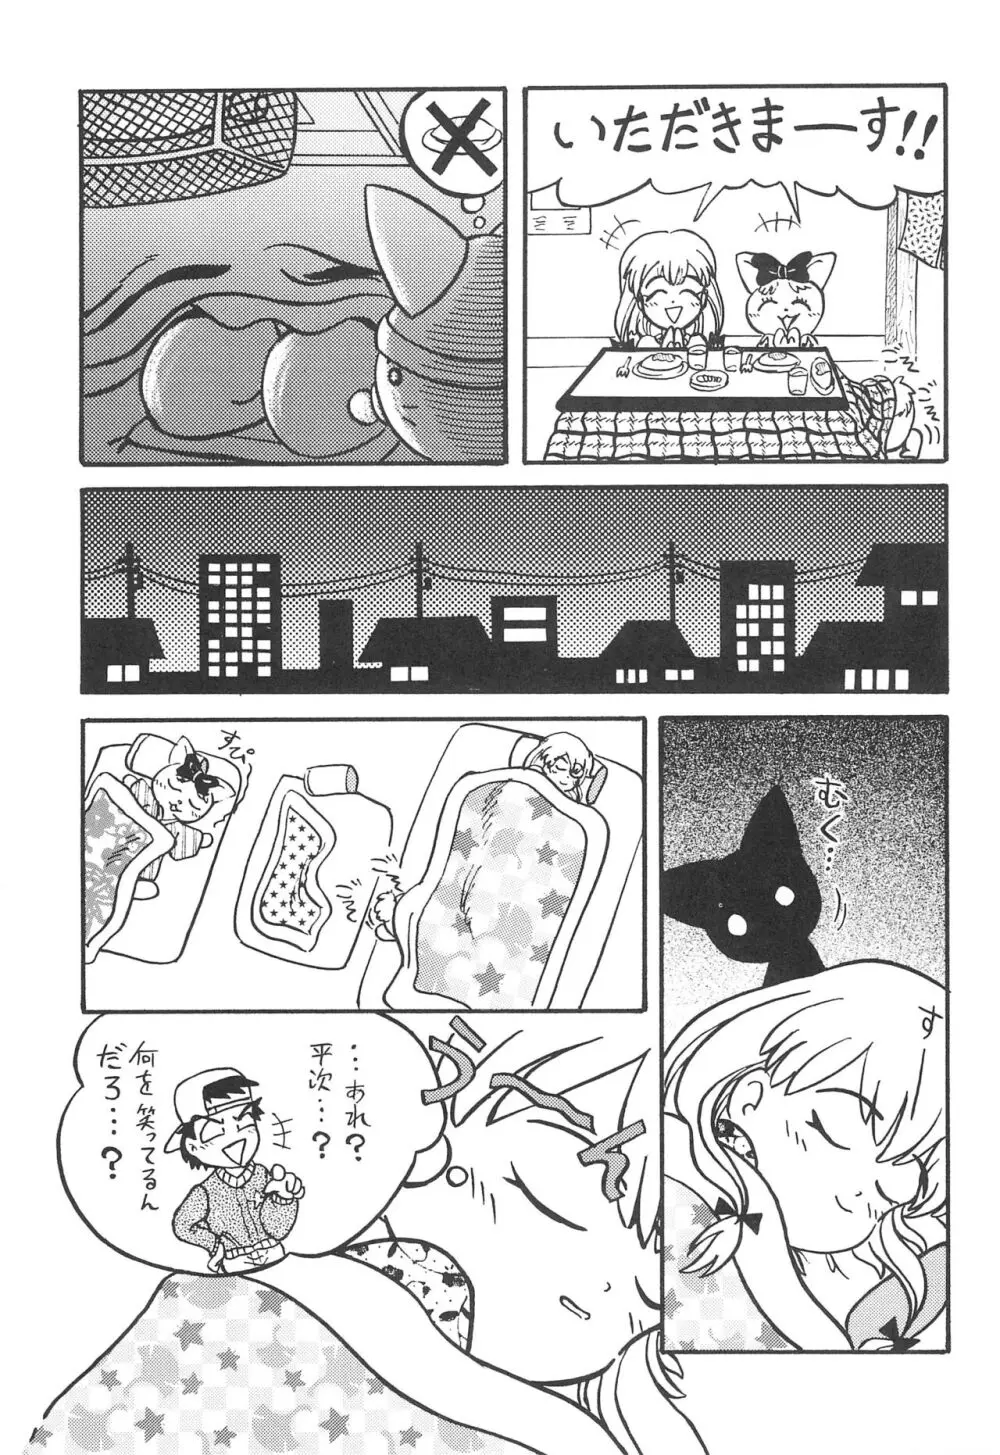 Fun House 9th Chame! - page63